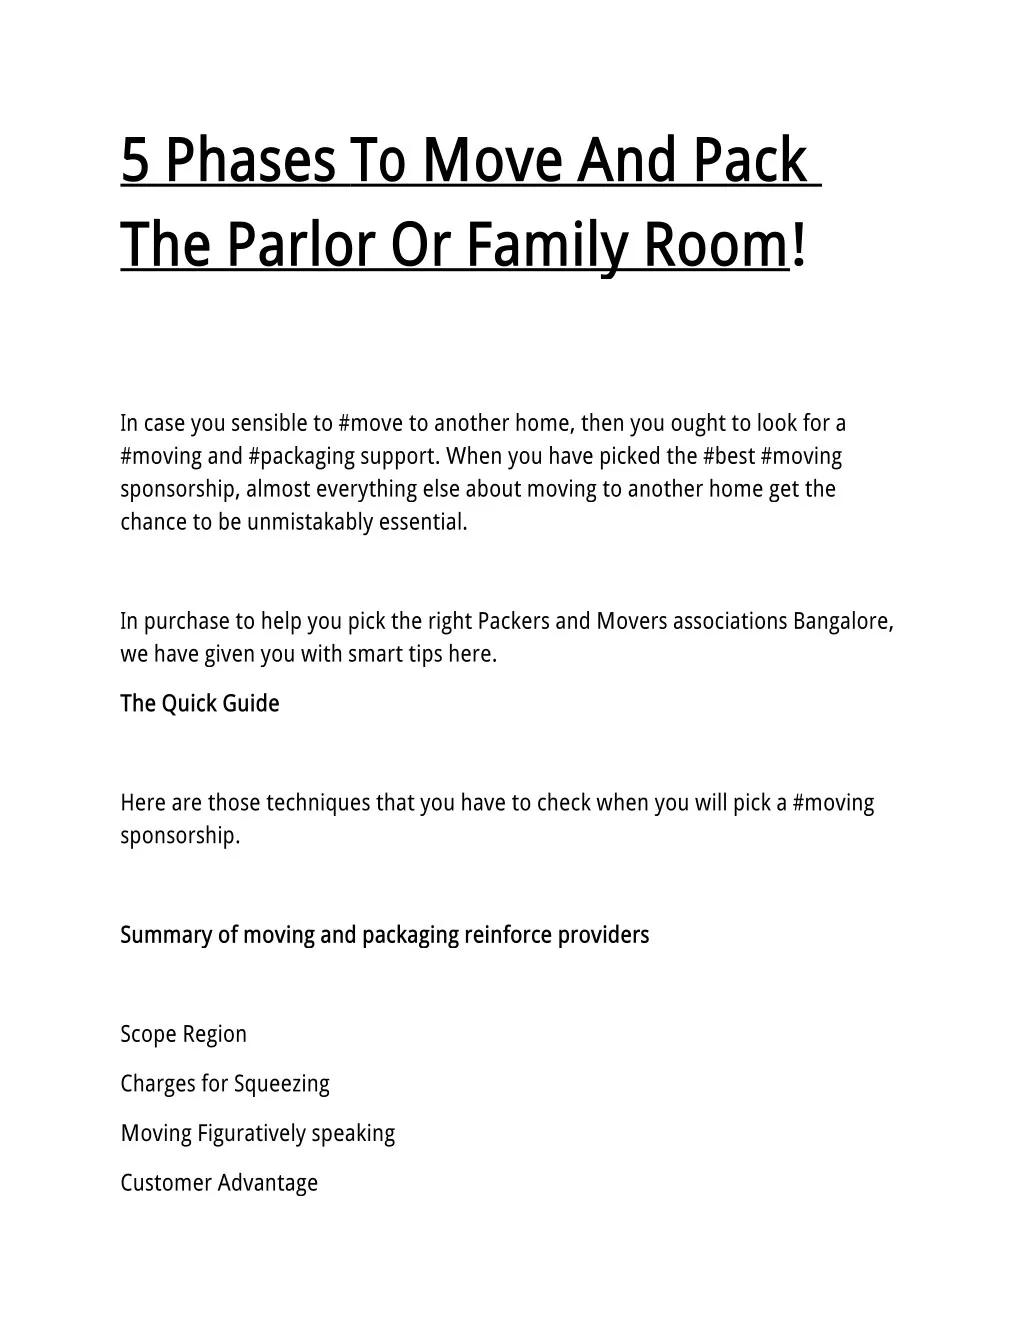 5 phases to move and pack the parlor or family